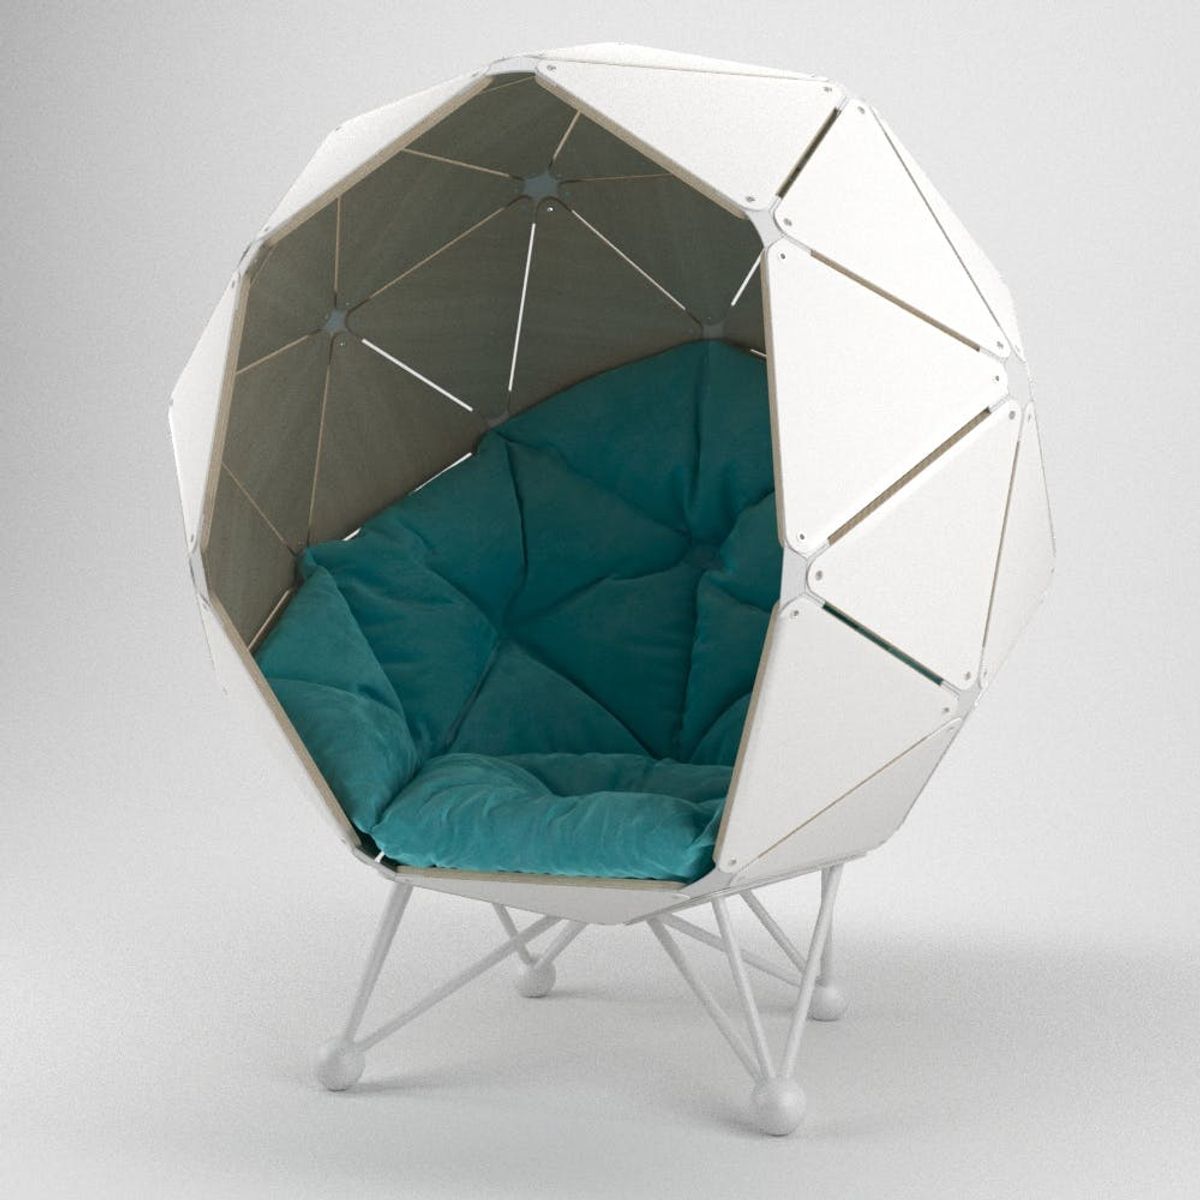 This Cocoon-Like Chair Is the Perfect Working Space When You Just Need to Be Alone